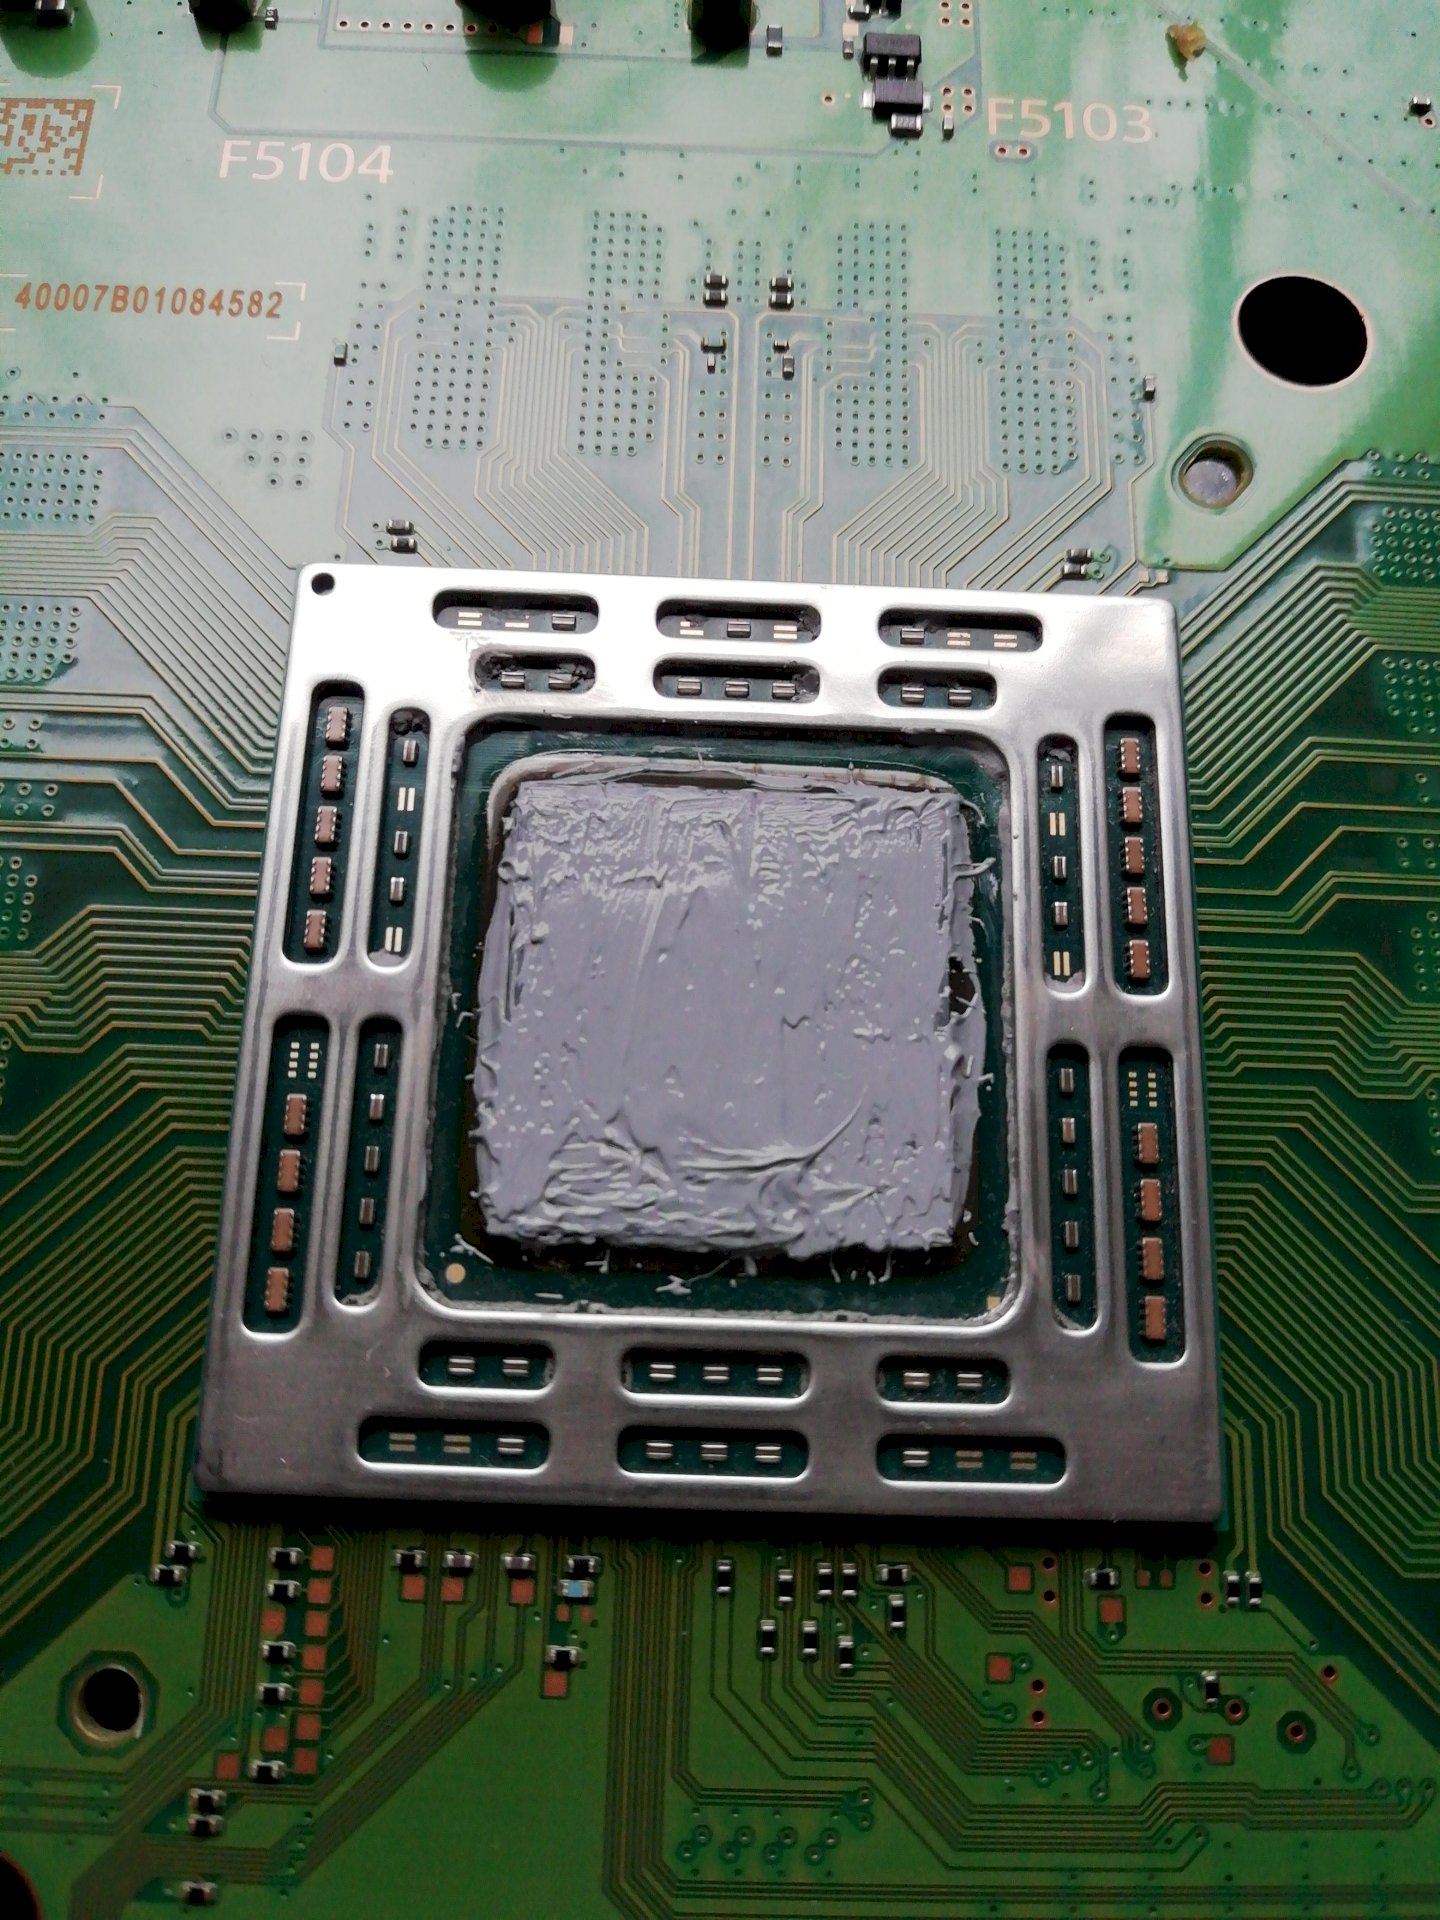 Ps4 how long do you have to wait until the thermal paste is dry